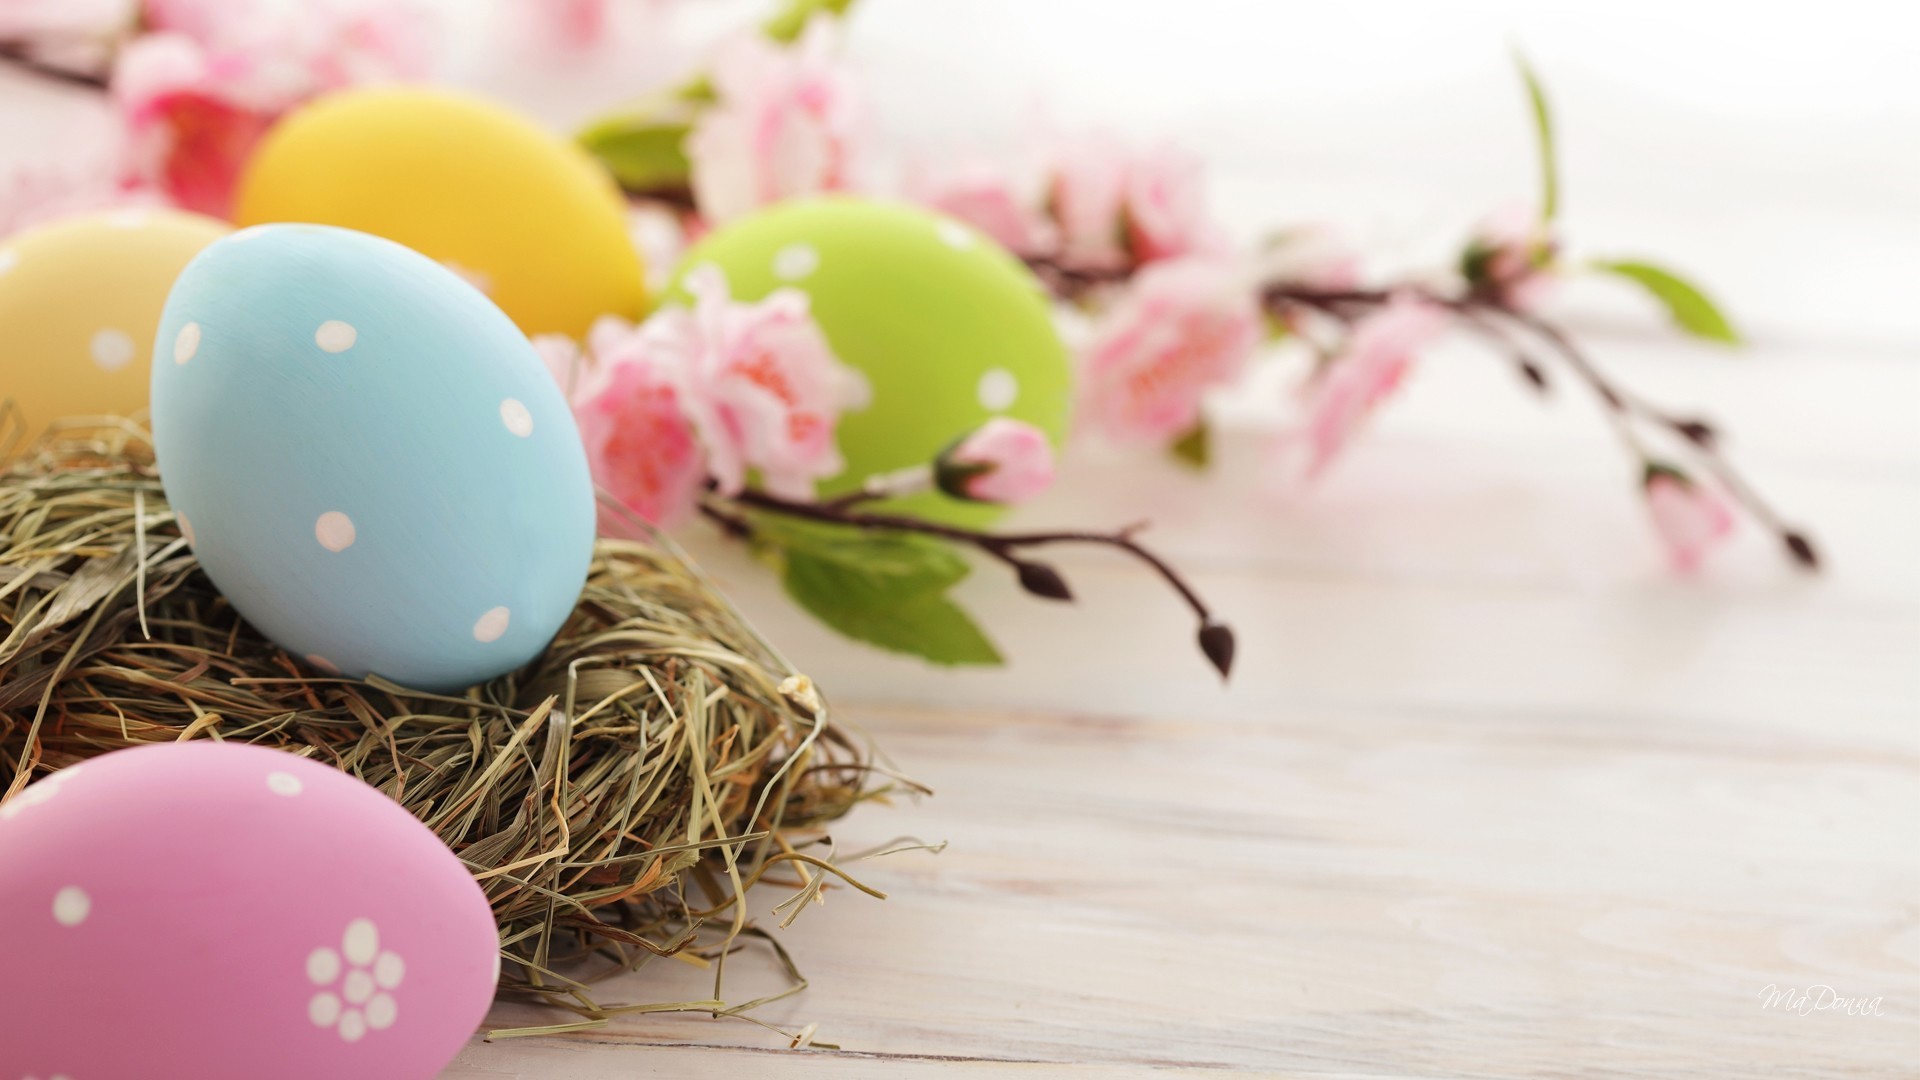 1920x1080  Top Collection of Easter Wallpapers: 159961866 Easter Background   px